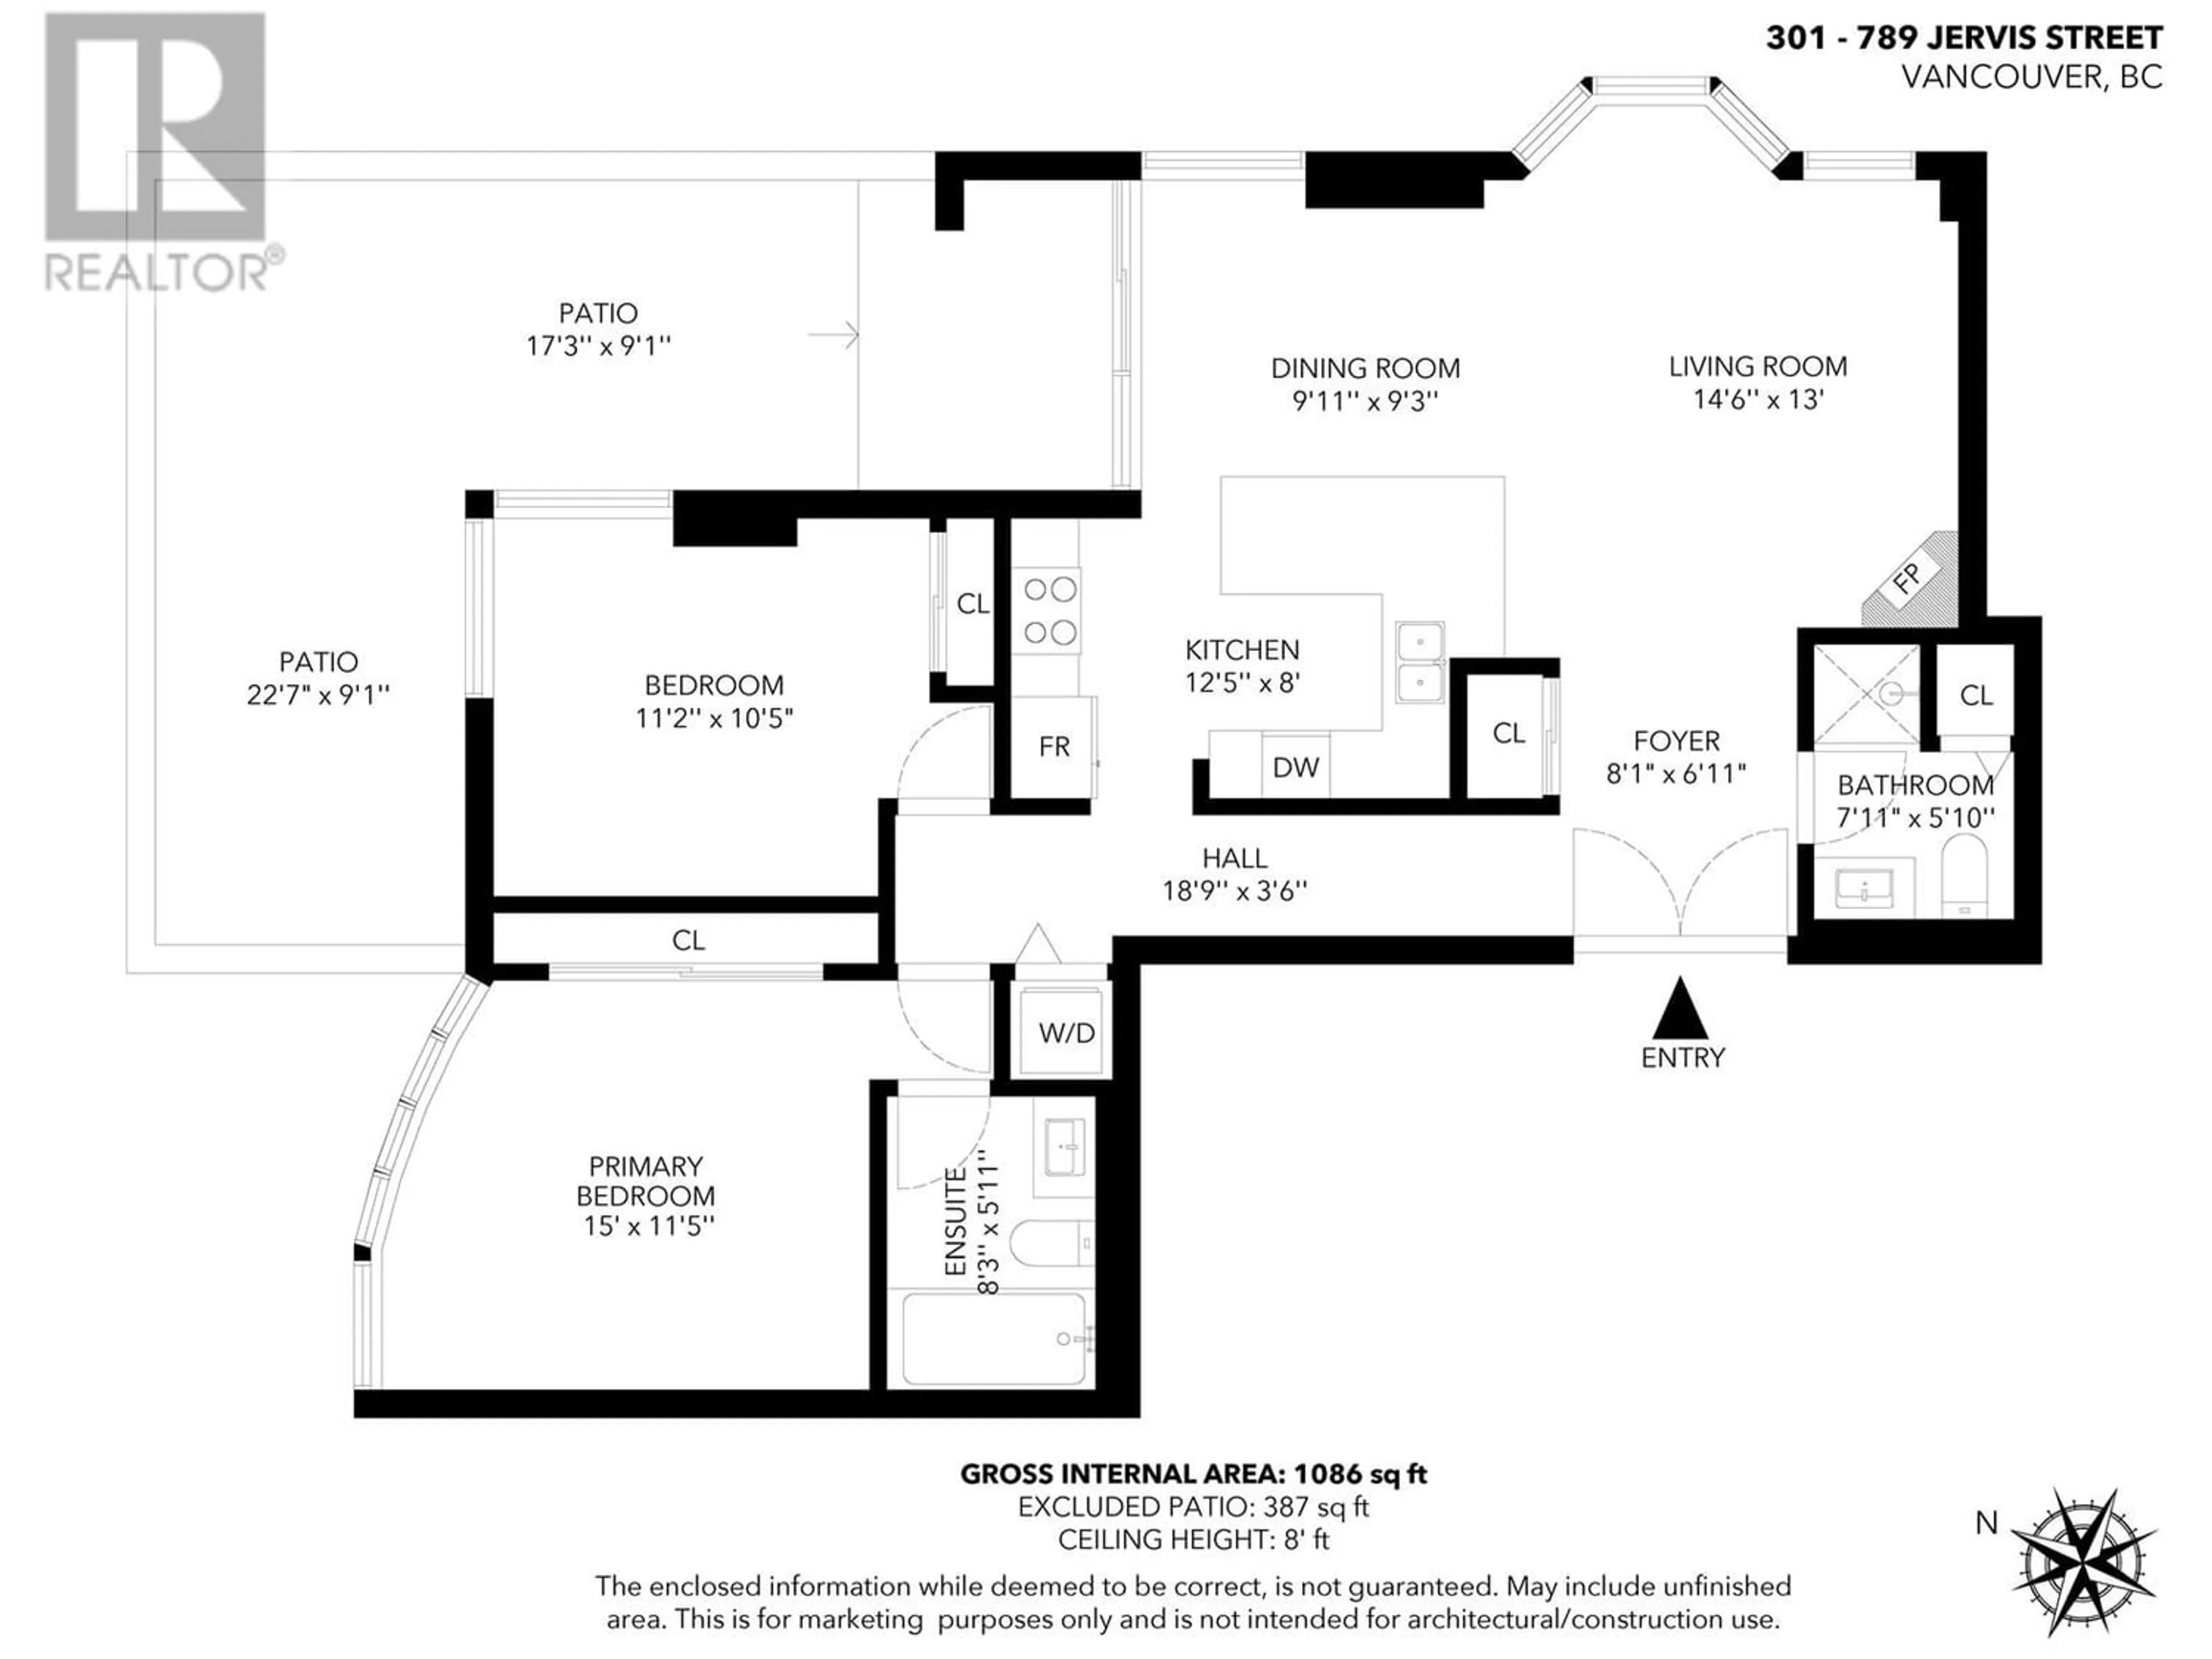 Floor plan for 301 789 JERVIS STREET, Vancouver British Columbia V6E2B1